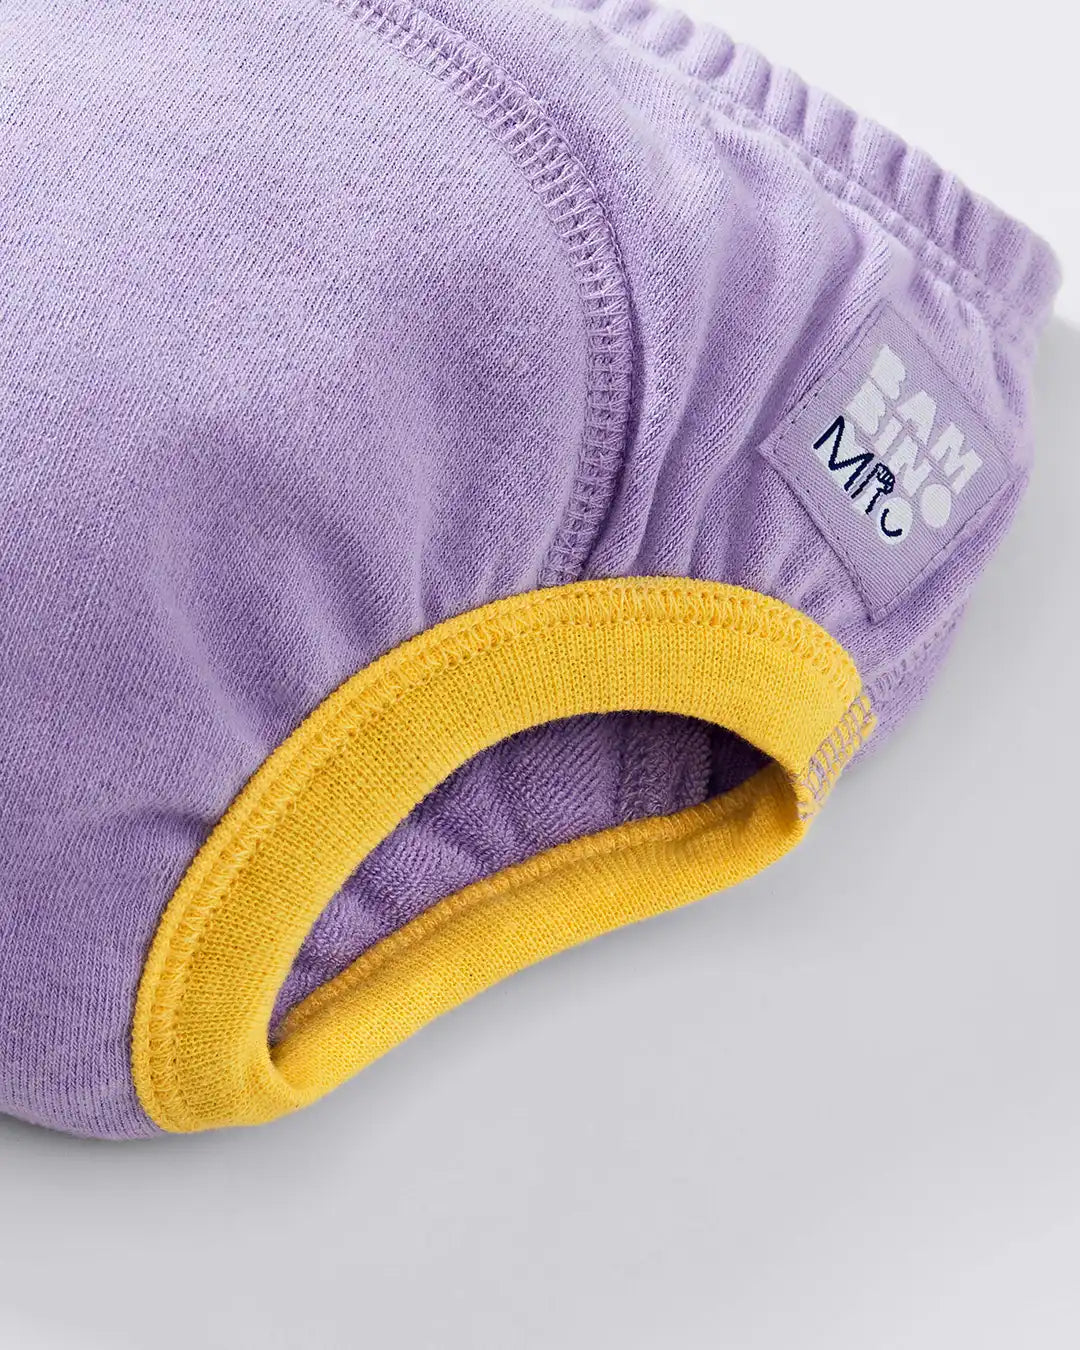 SNUGKINS Snug Potty Training Pants Babies/Toddlers/Kids Size2, 2-3 Yr  -Picture Perfect - Buy Baby Care Products in India | Flipkart.com